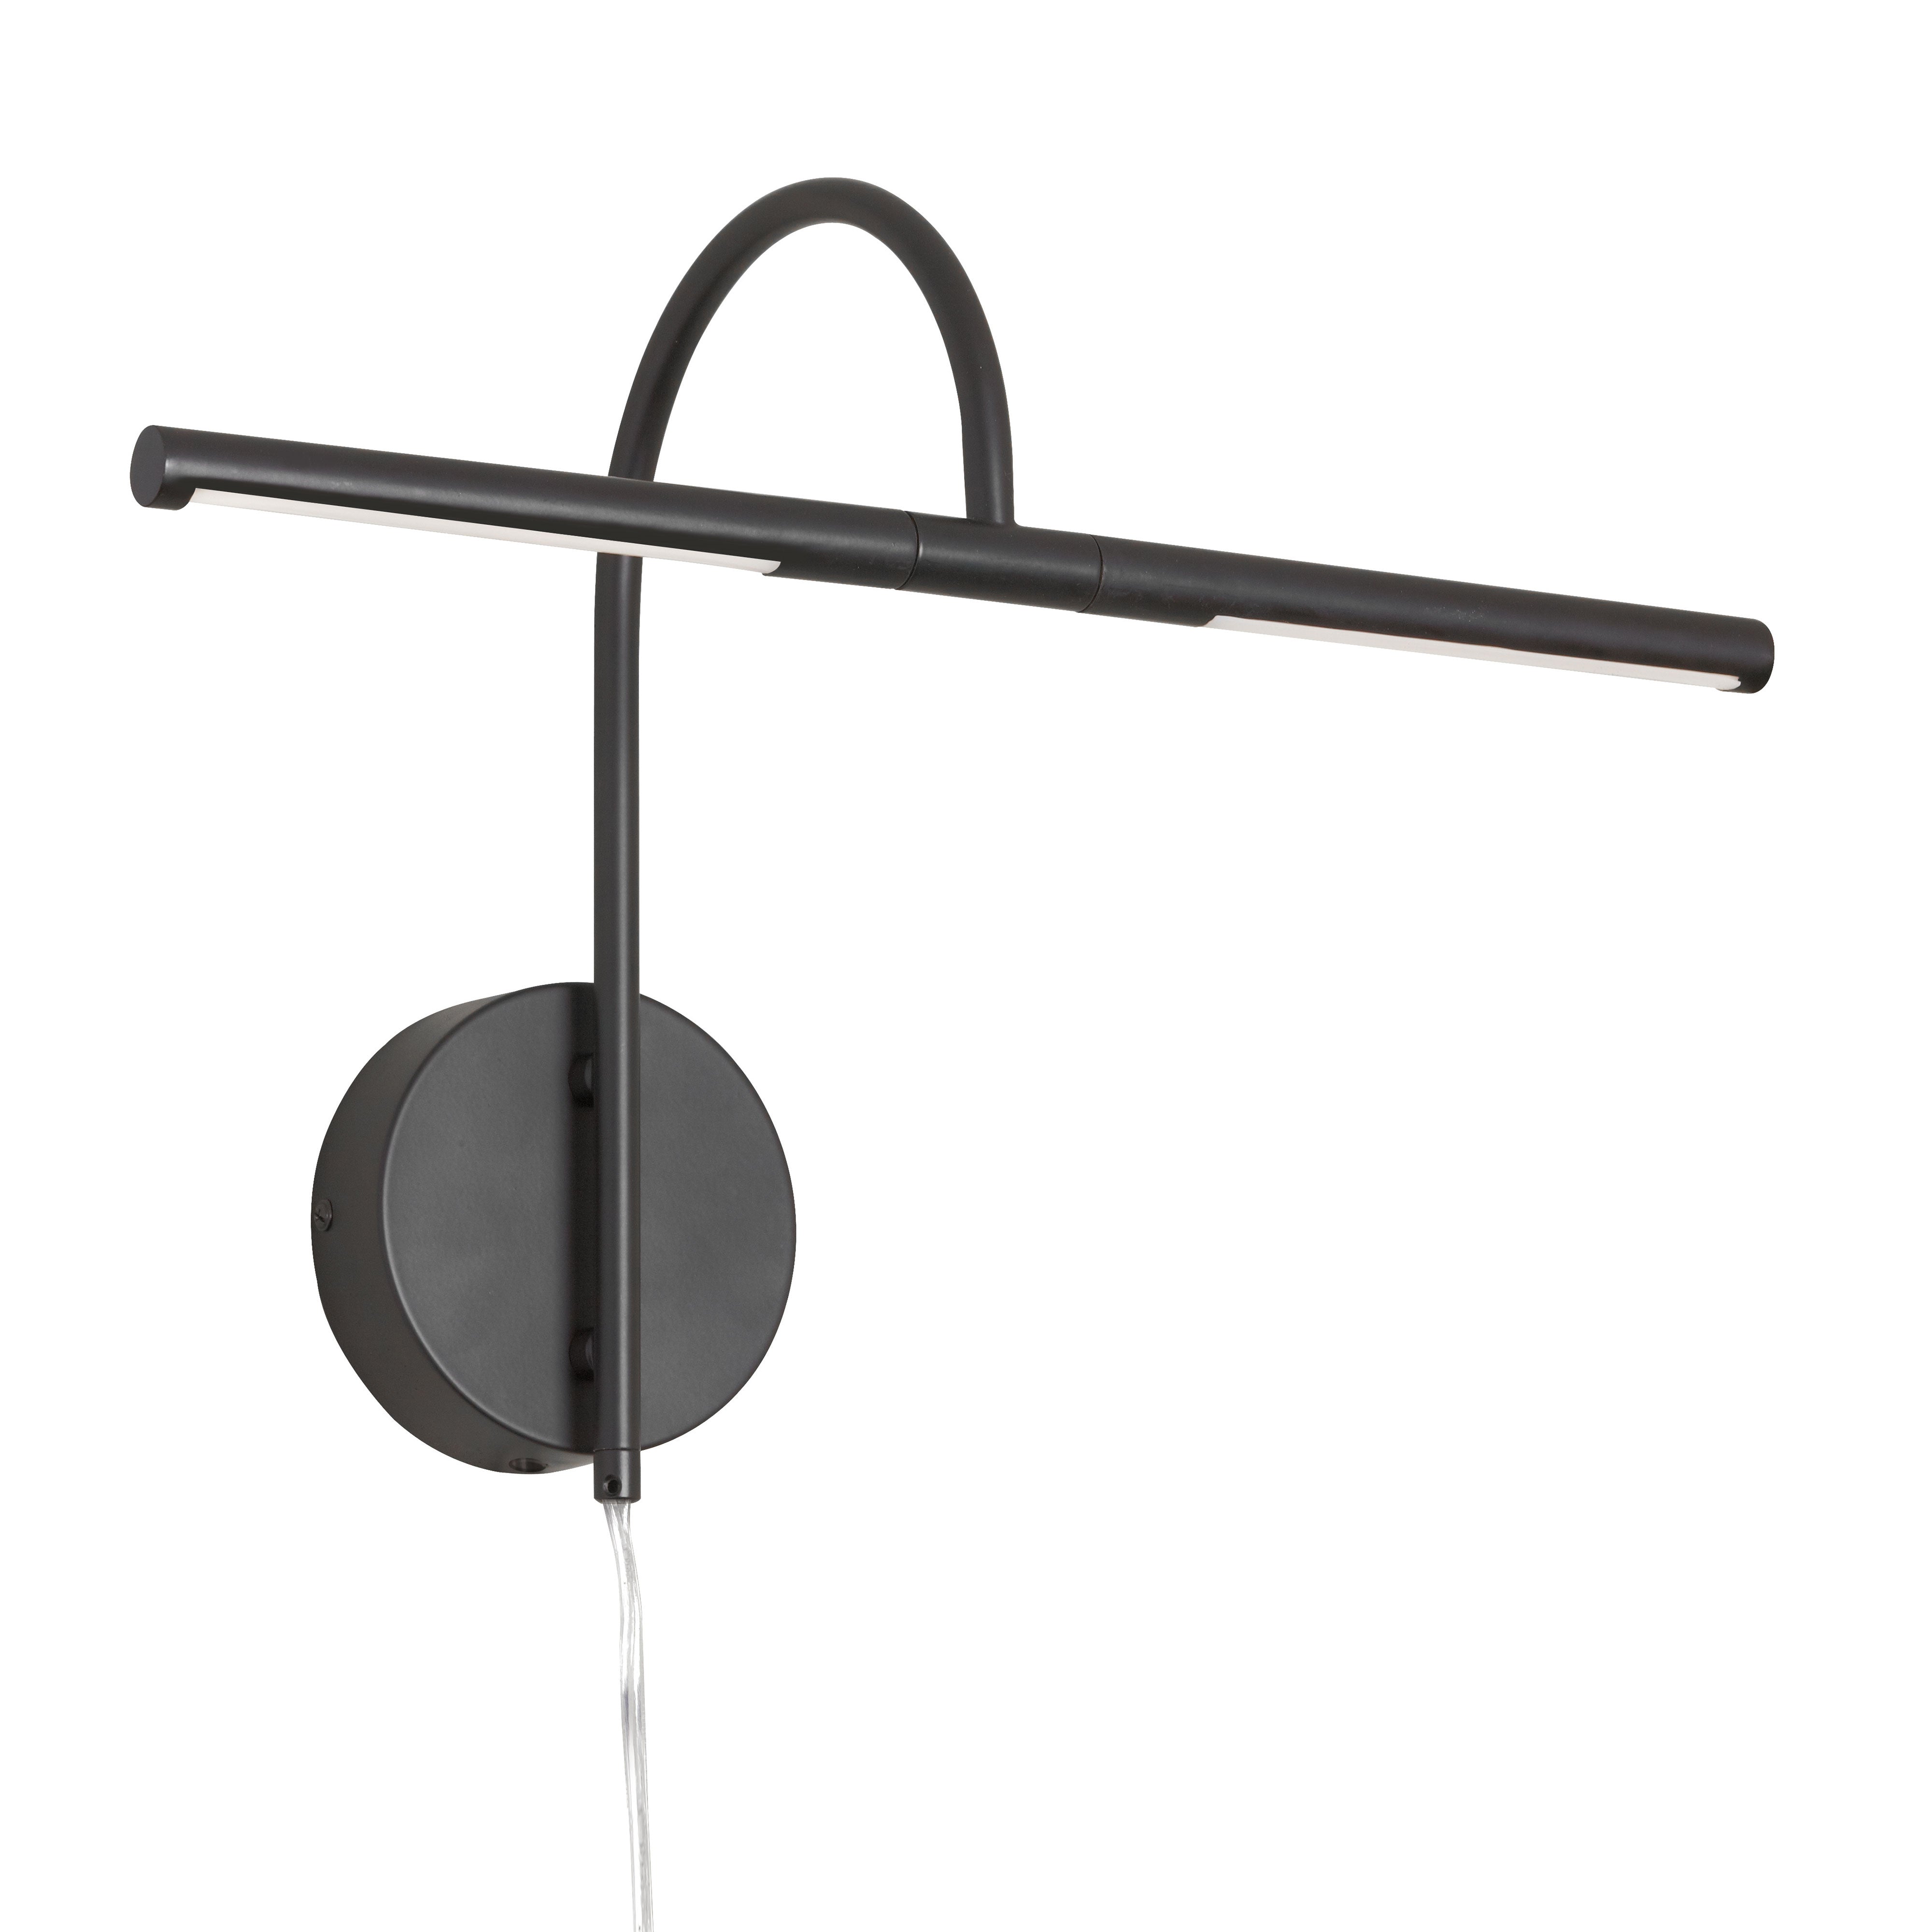 DISPLAY/EXHIBIT Wall sconce à tableau Black INTEGRATED LED - PICLED-152-MB | DAINOLITE